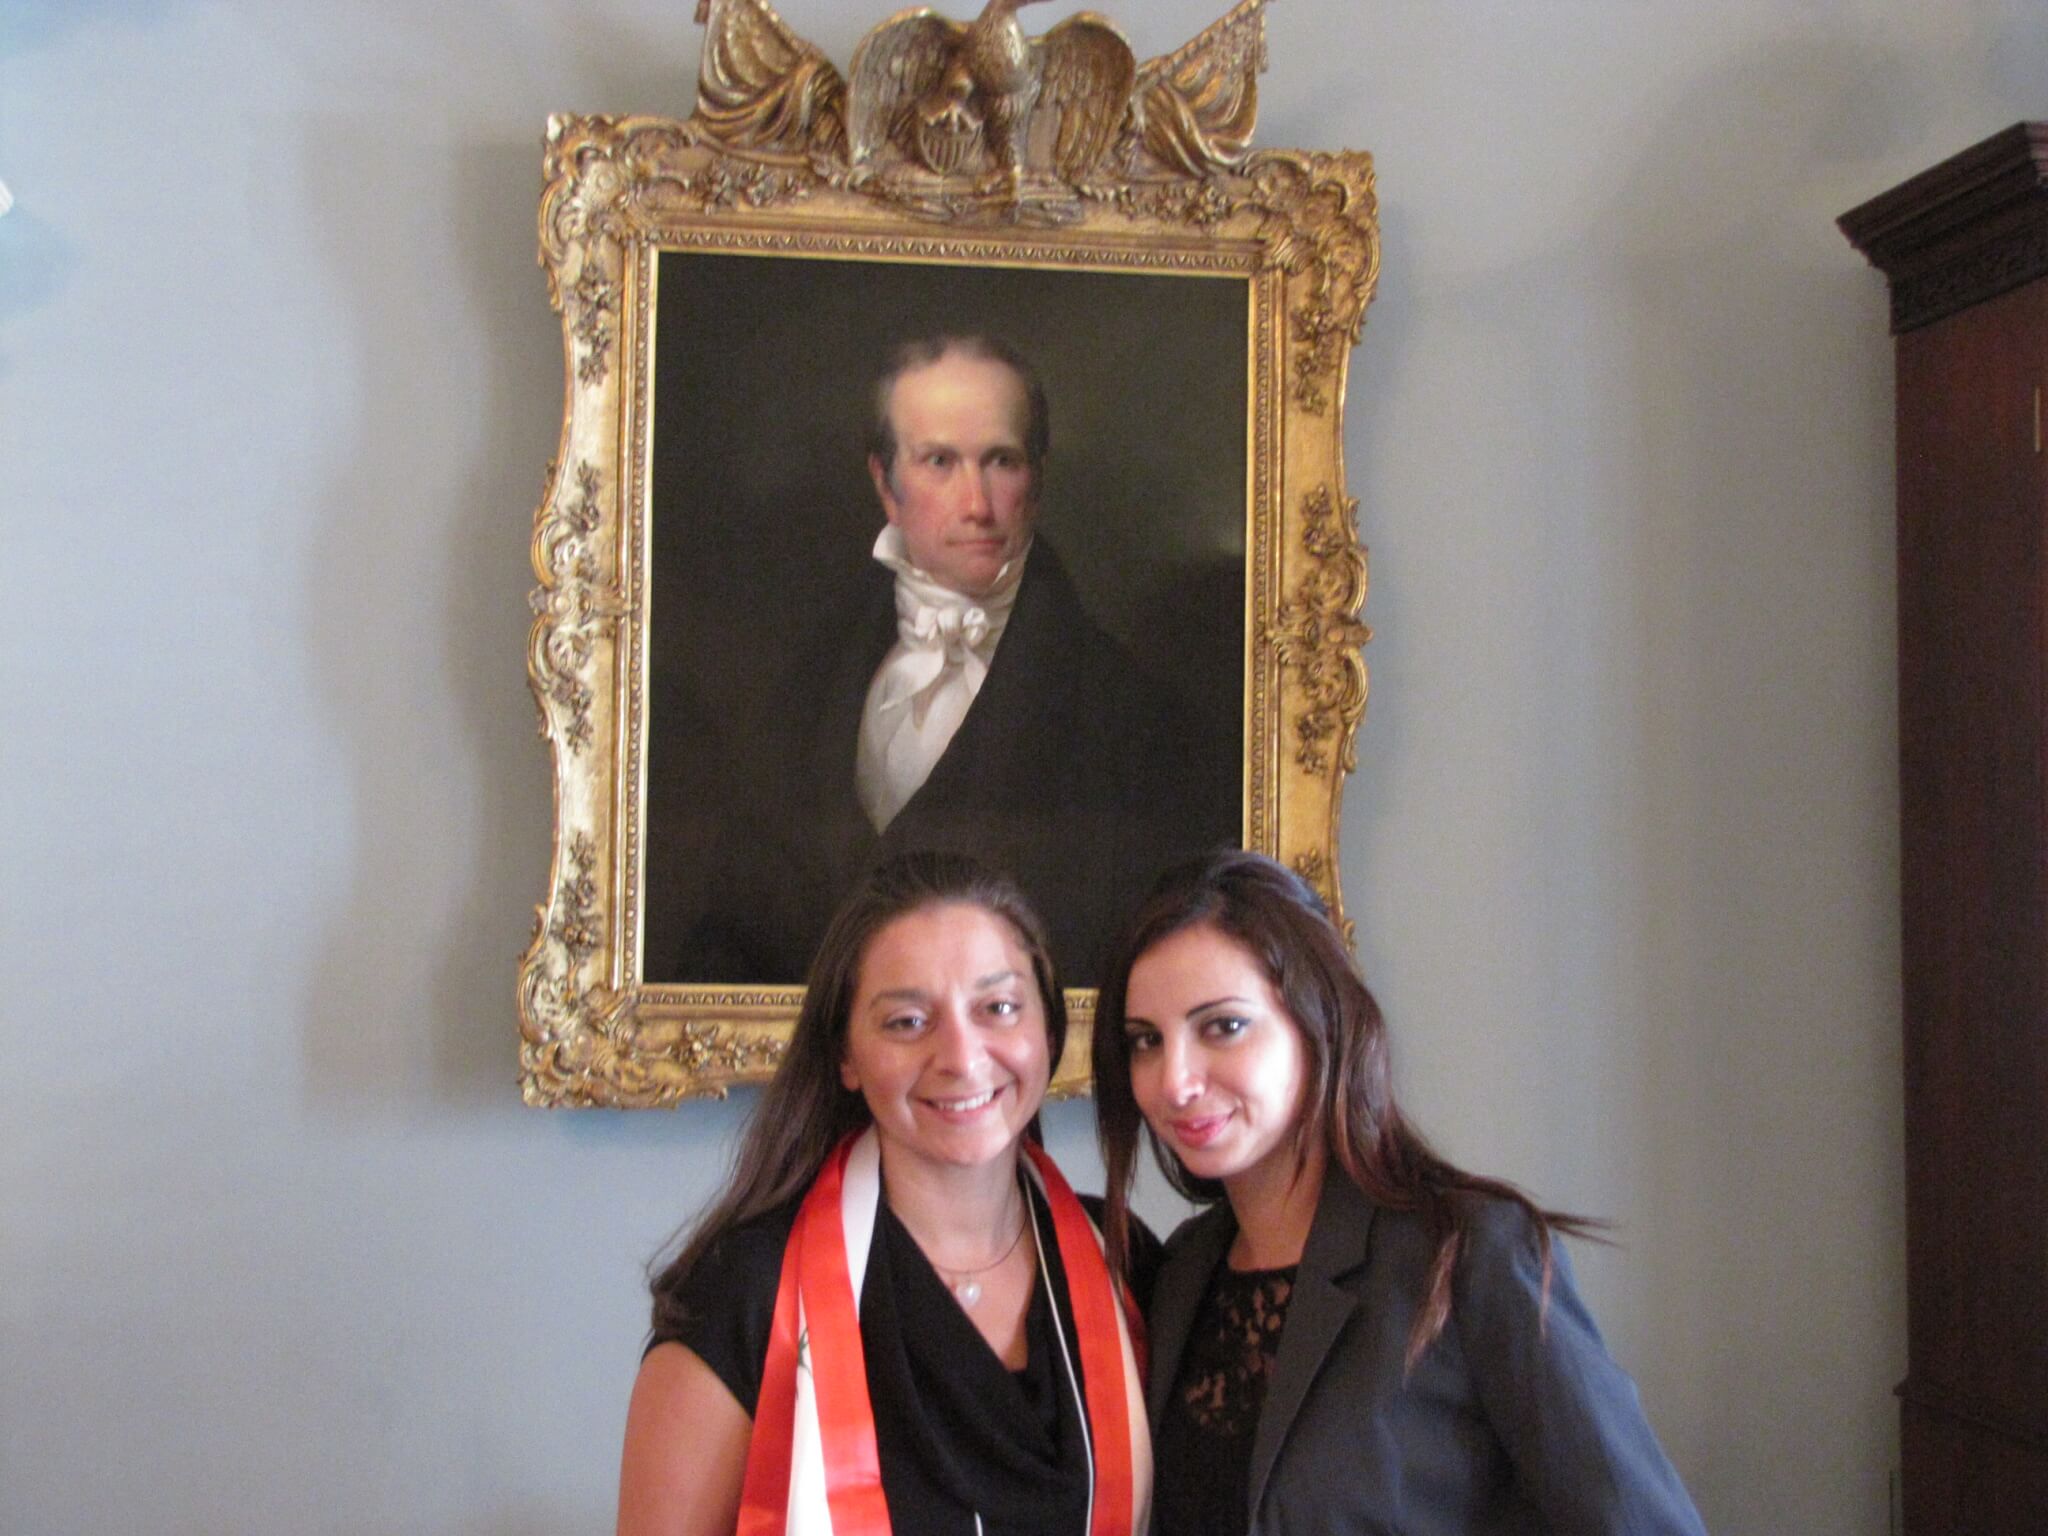 Jessica Obeid, 2012 TechWomen participant with her Mentor at the Department of State luncheon.